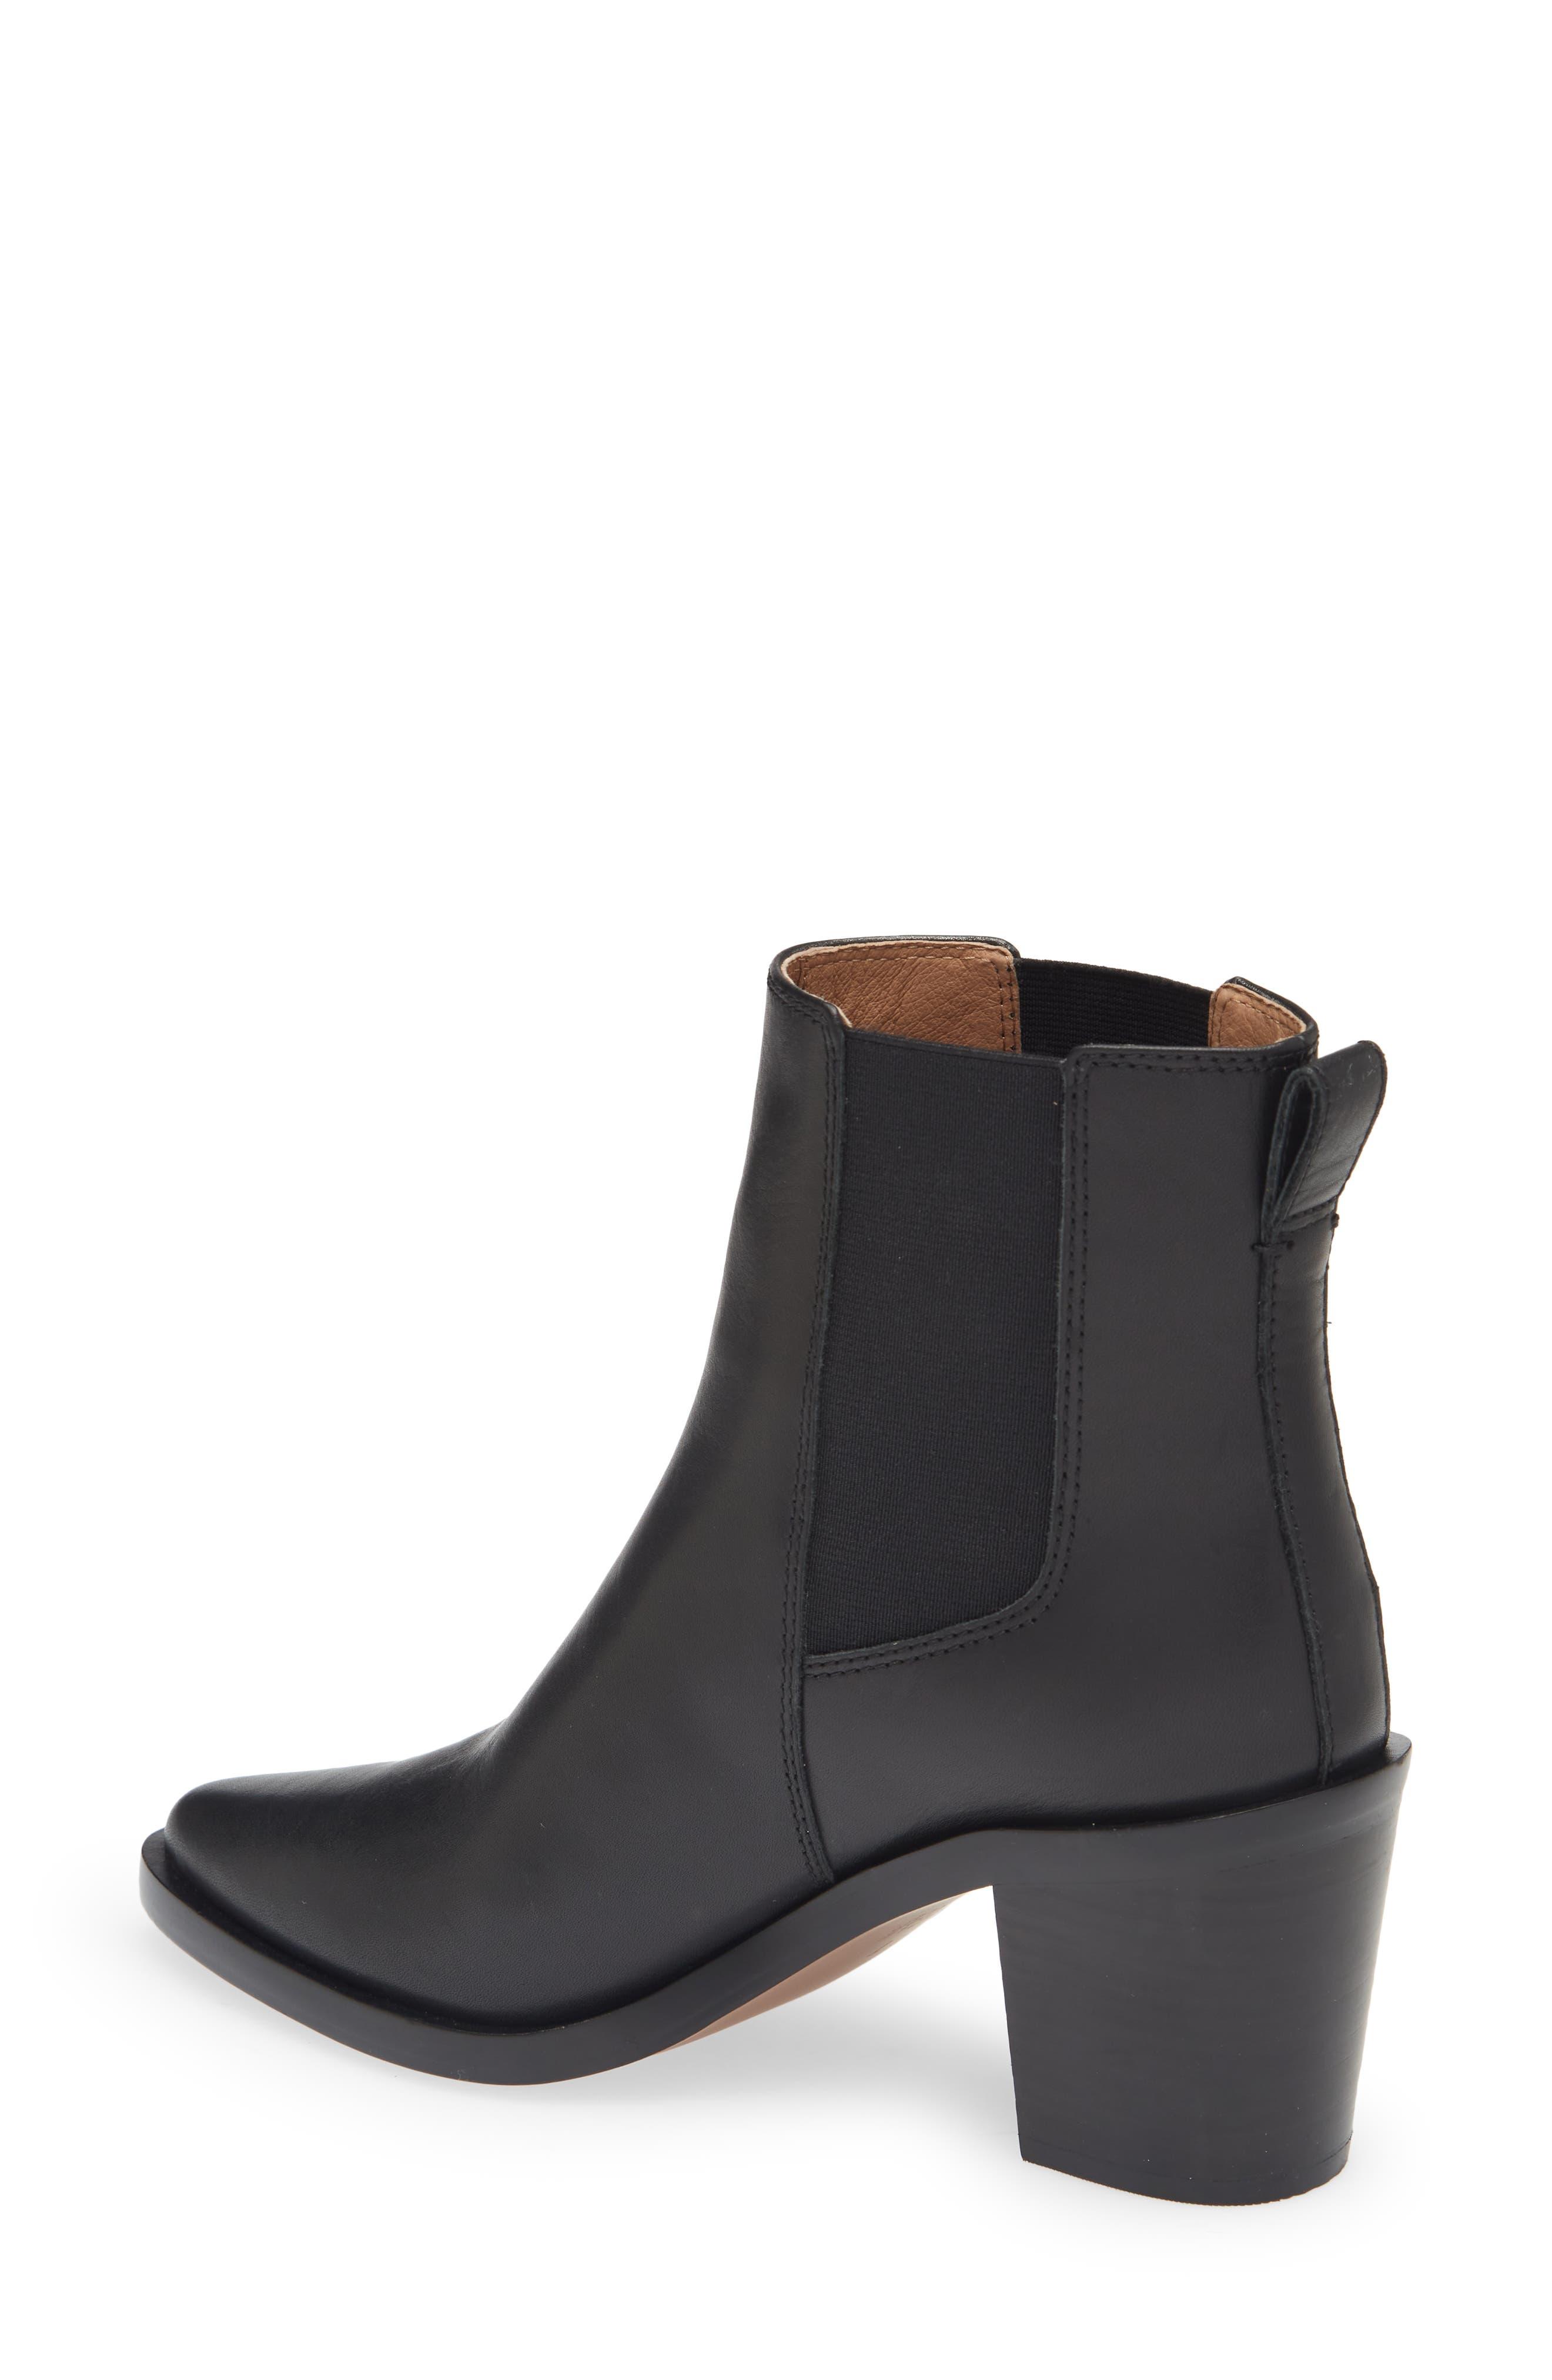 Madewell The Elspeth Chelsea Boot in Black | Lyst